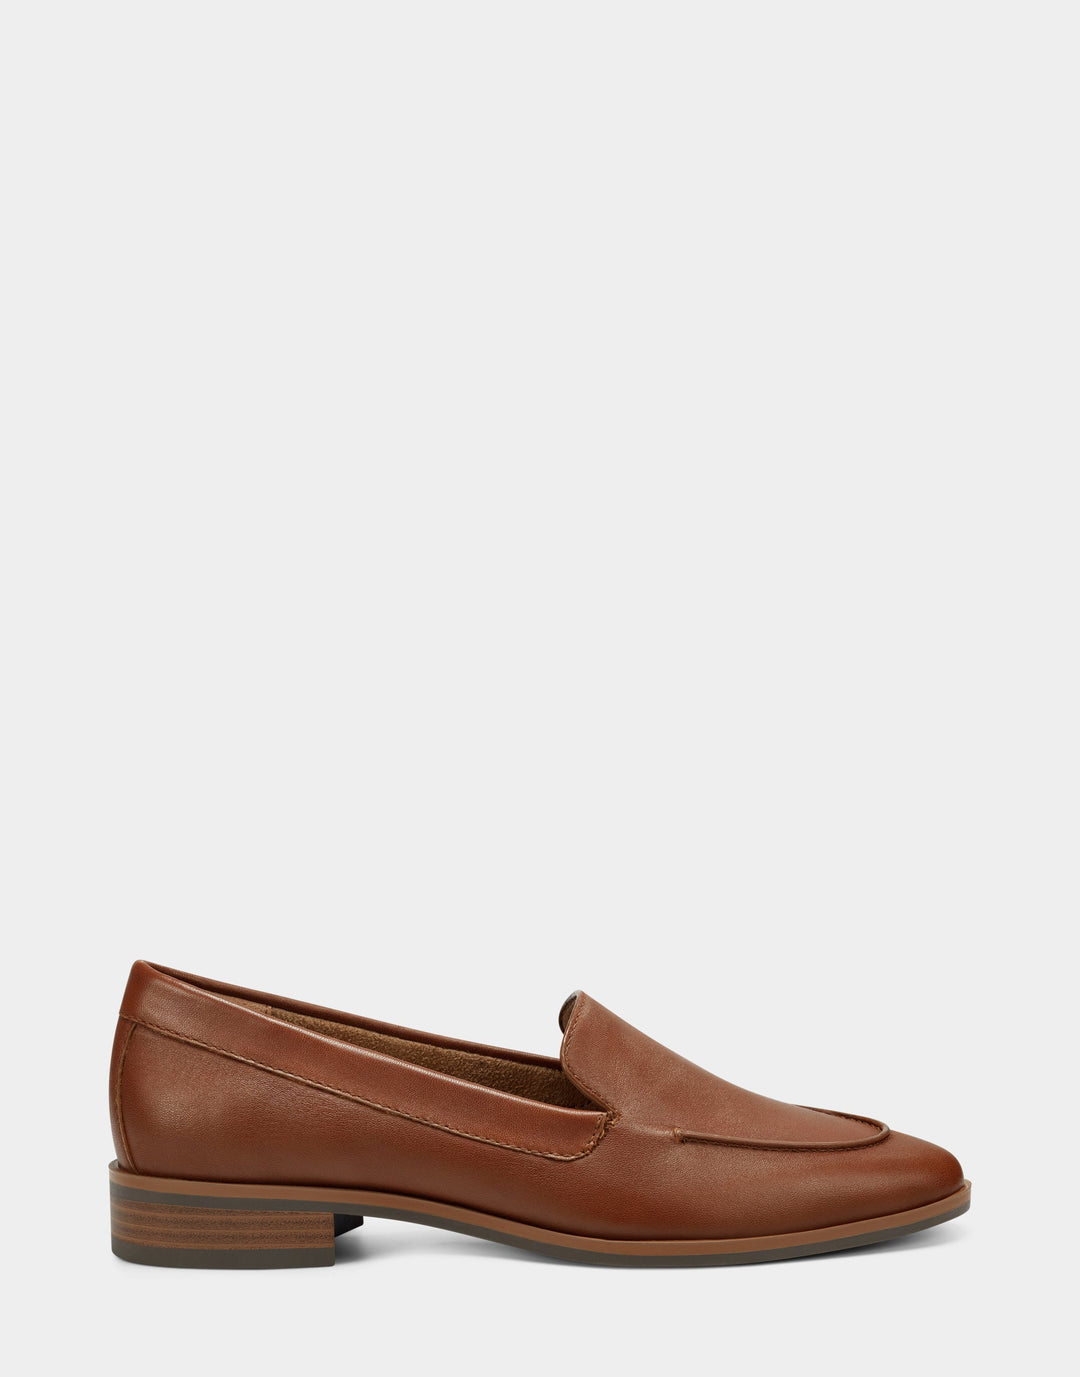 East Side - comfortable women's loafers in tan